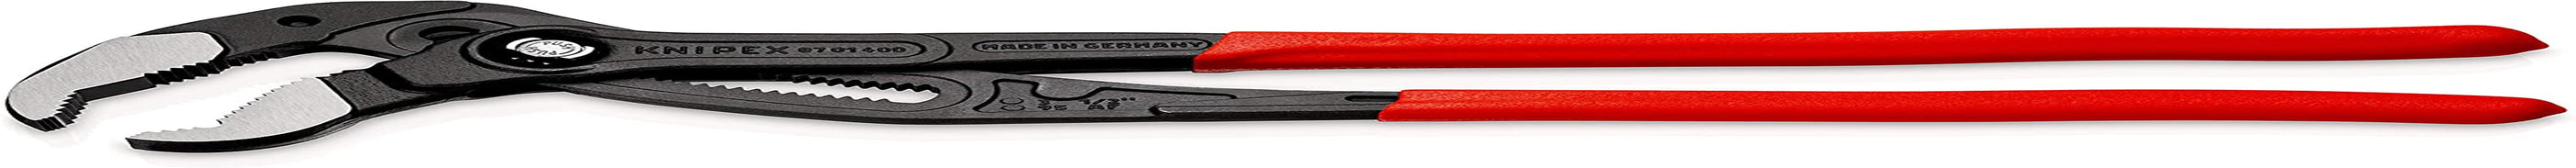 KNIPEX, KNIPEX 87 01 400 Cobra XL Pipe Wrench and Water Pump Pliers Grey Atramentized Plastic Coated 400 Mm